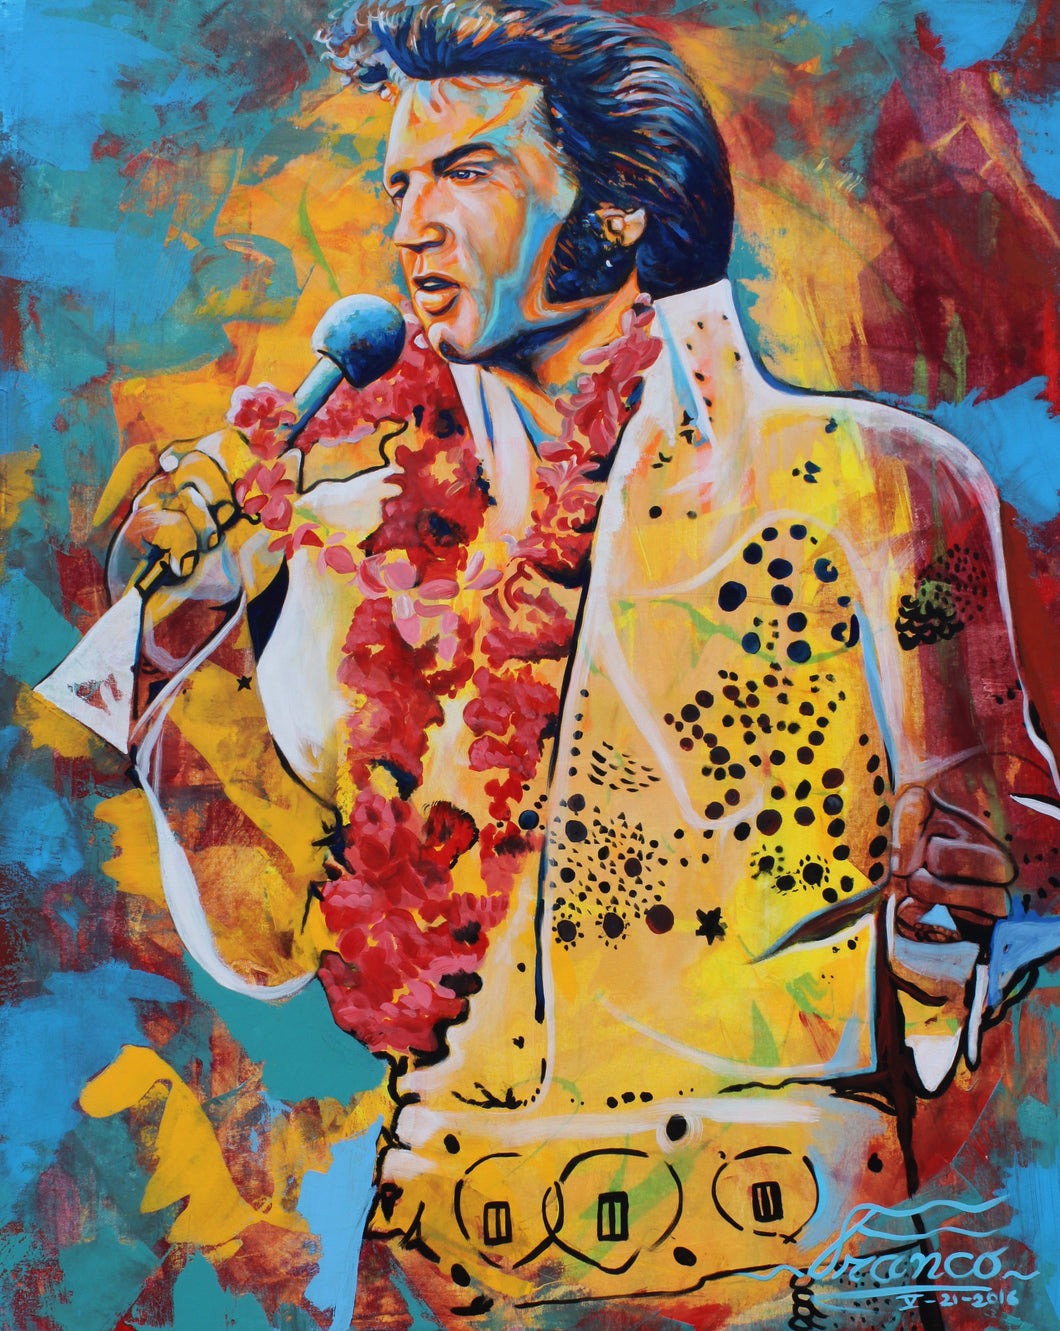 Elvis Presley |  24 x 18 in. | Limited Edition 1/25 | Enhanced print on canvas.